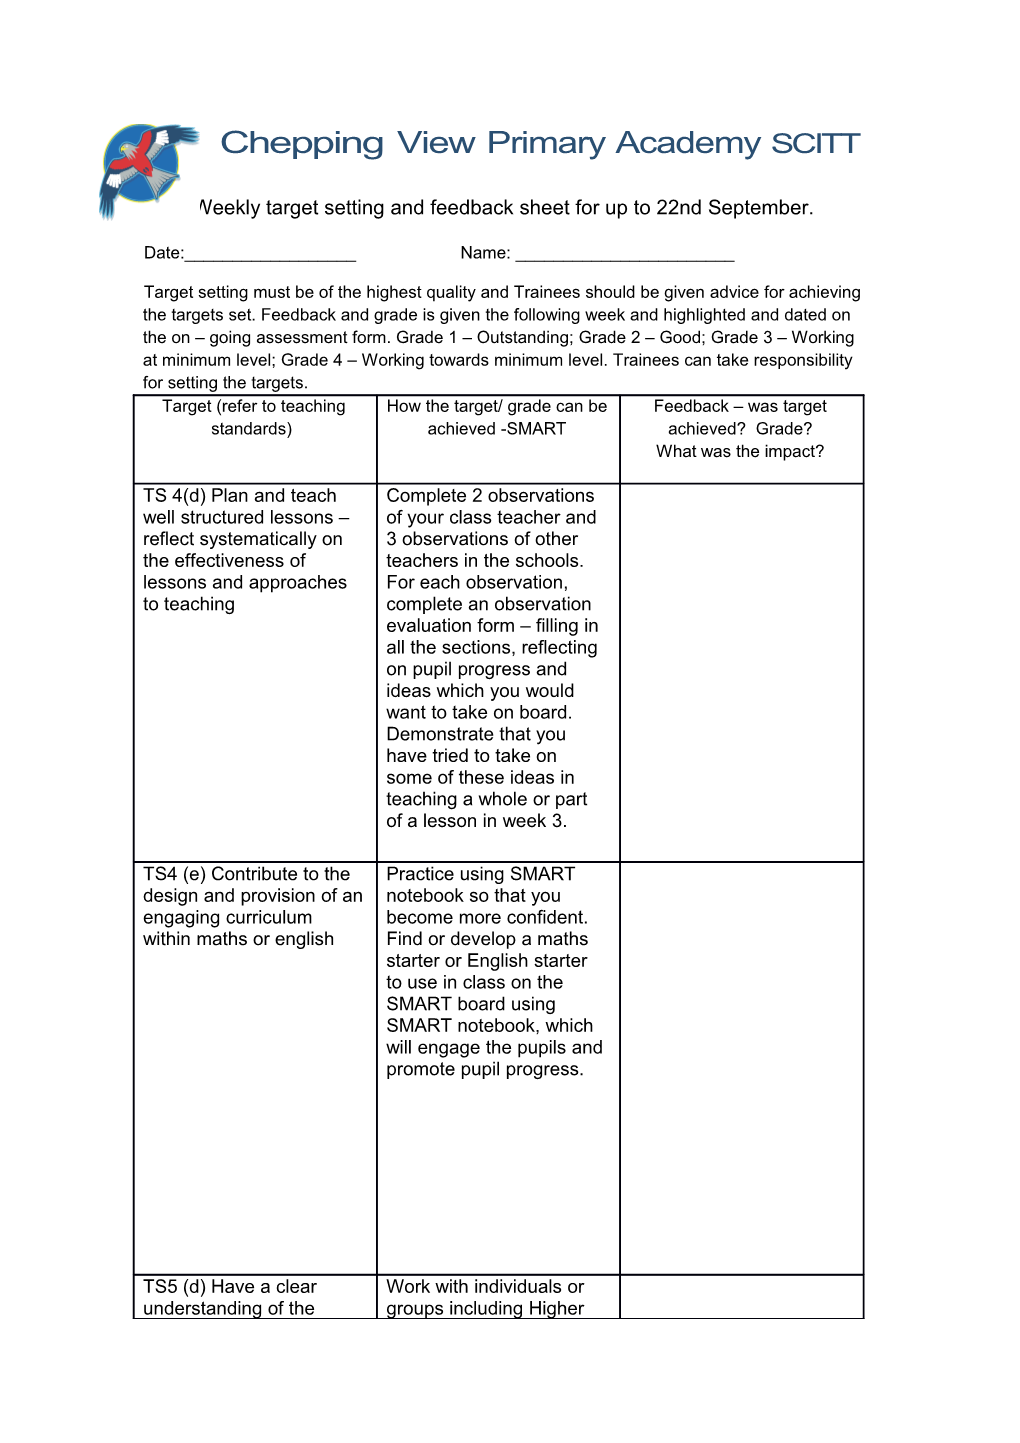 Weekly Target Setting and Feedback Sheet for up to 22Nd September